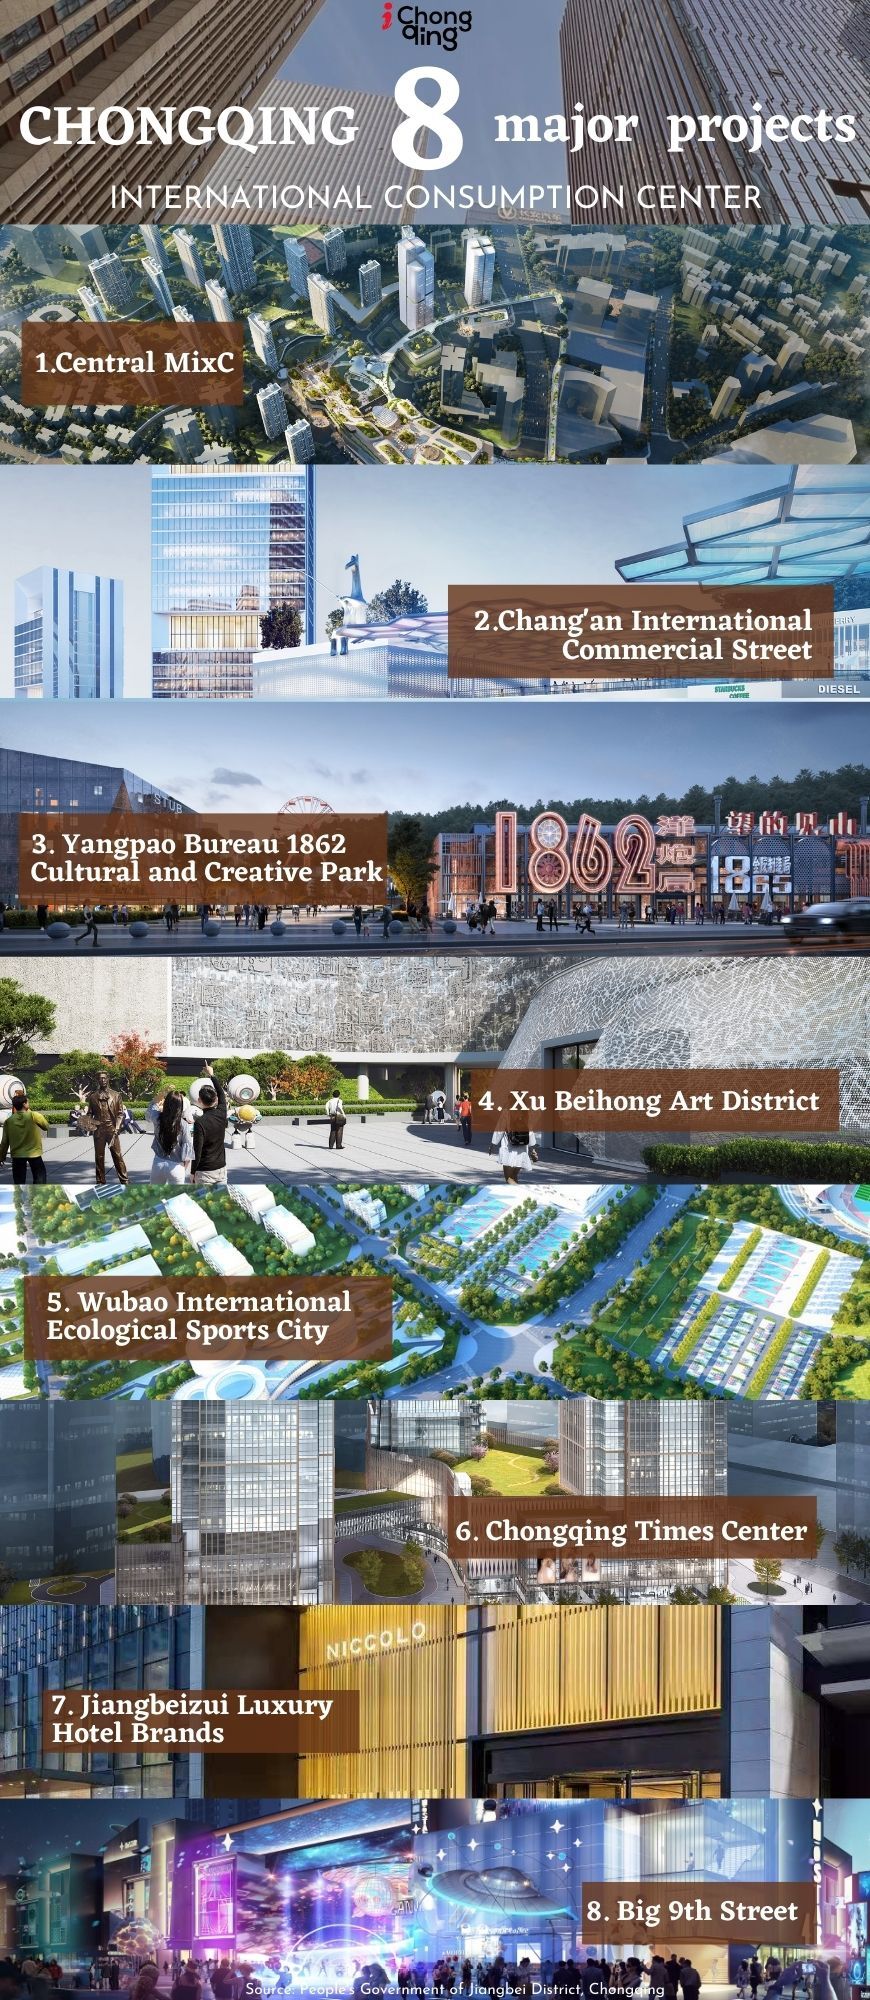 Eight major international consumption center projects announced in Chongqing on April 8, 2022.